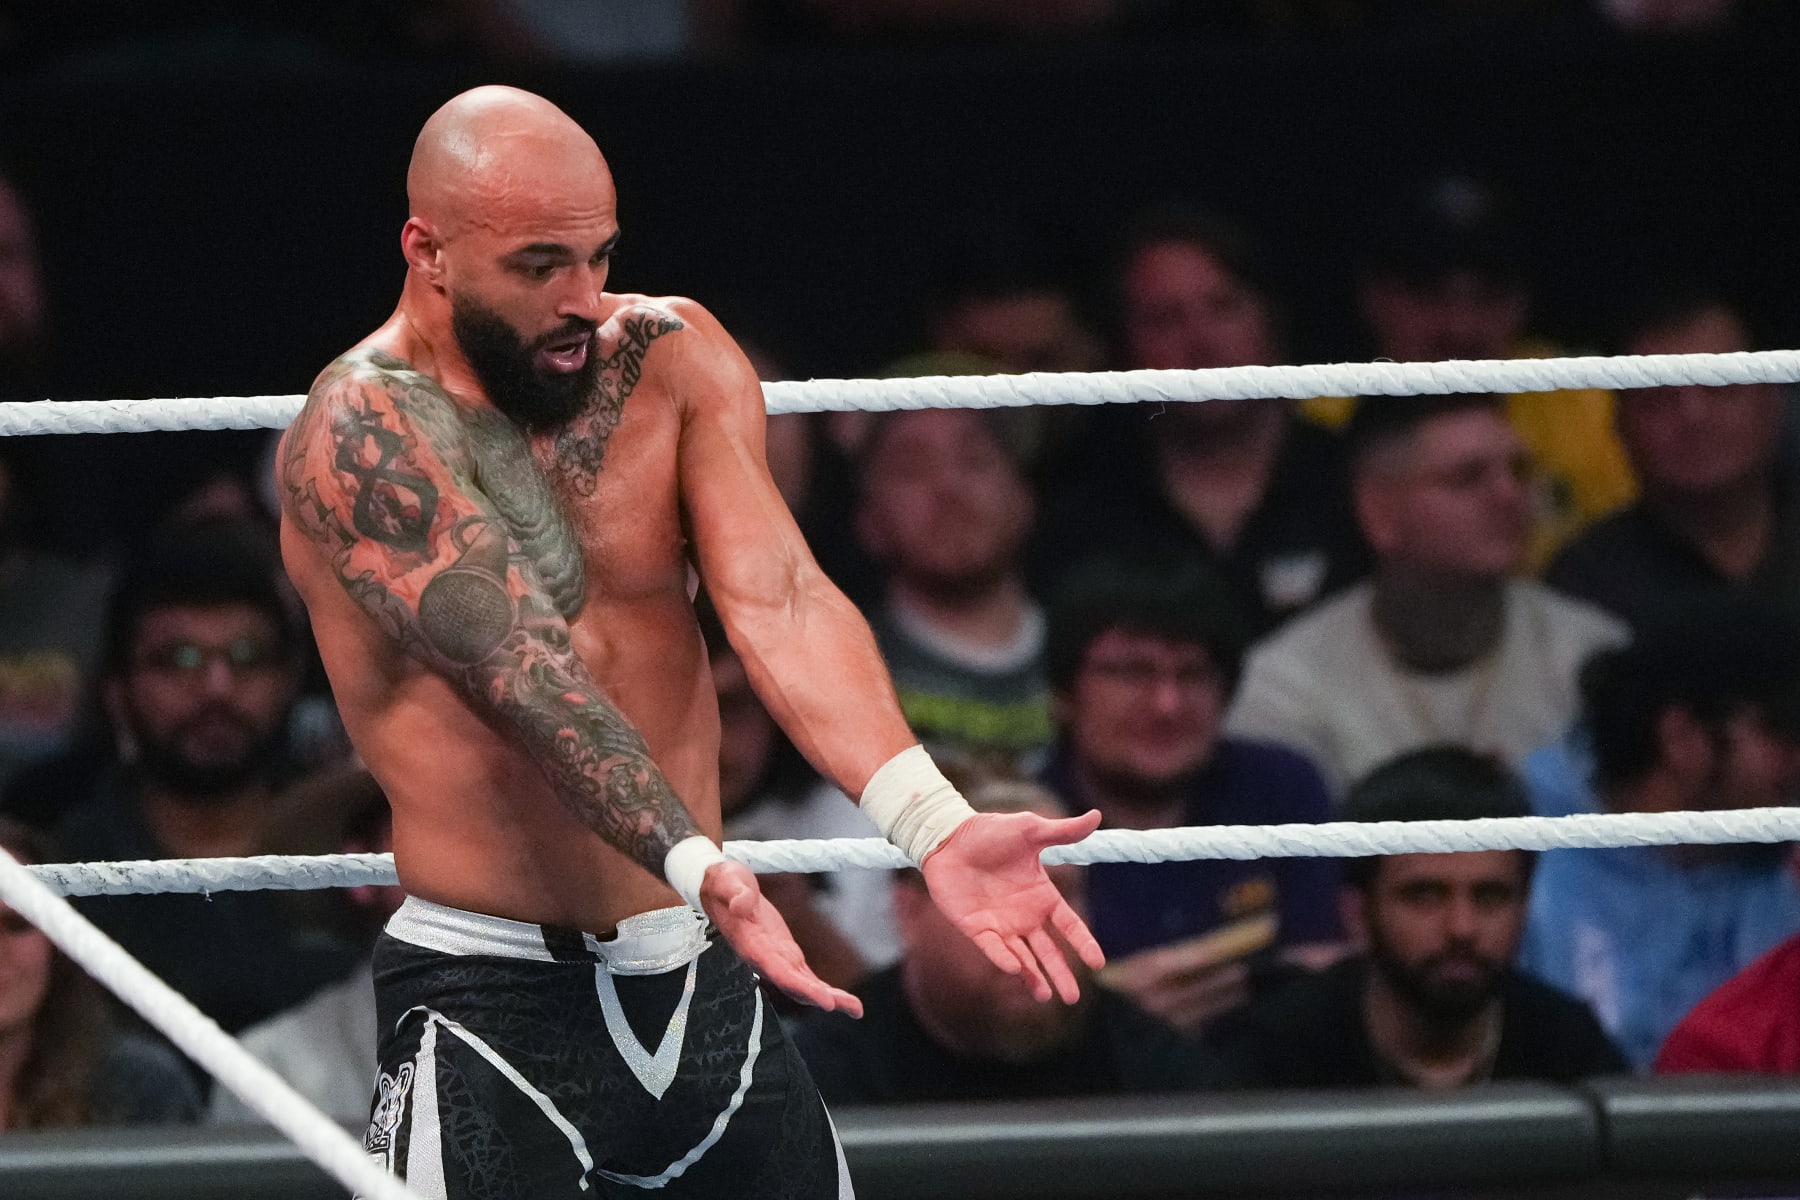 Video: Ricochet Leaves WWE Raw in Ambulance After Bron Breakker’s Attack